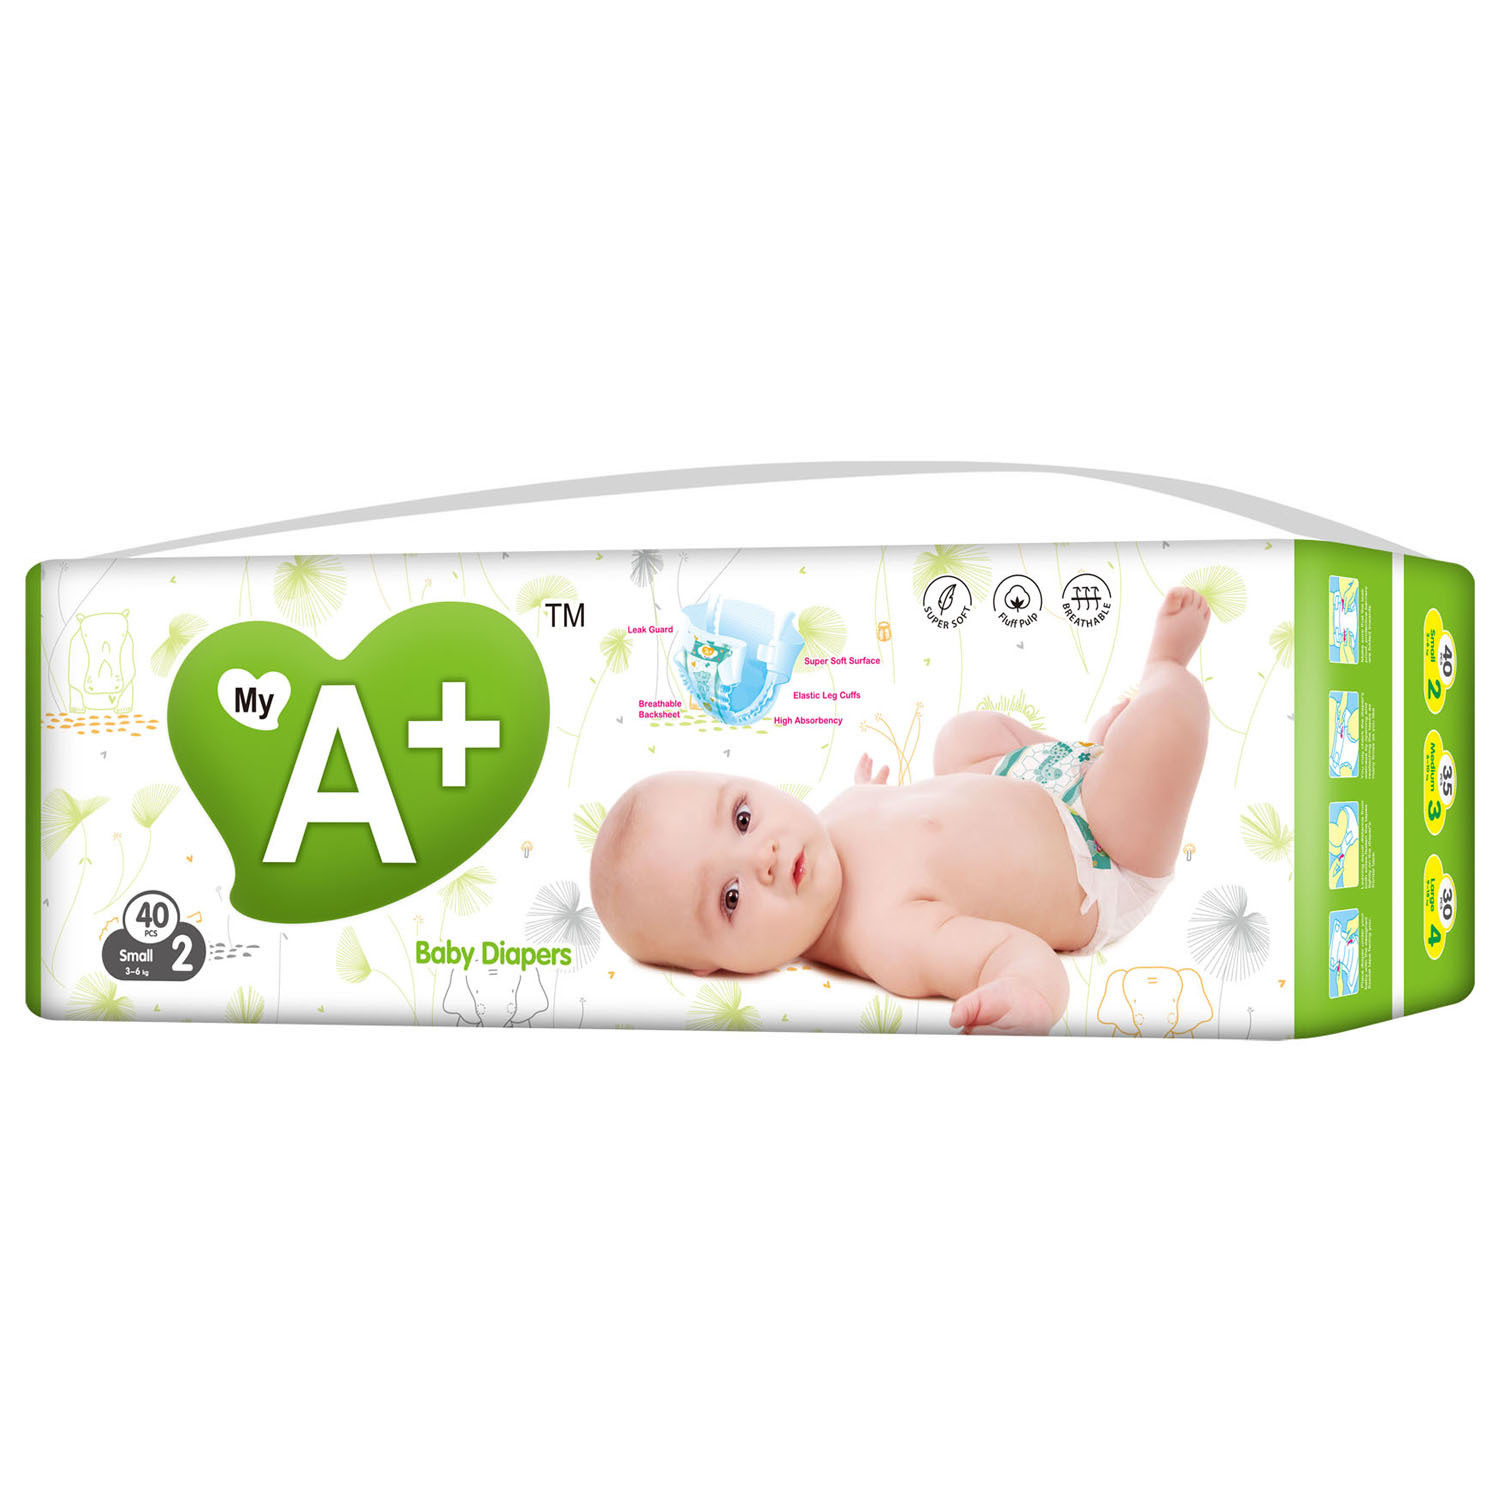 My A+ Brand Baby Diaper